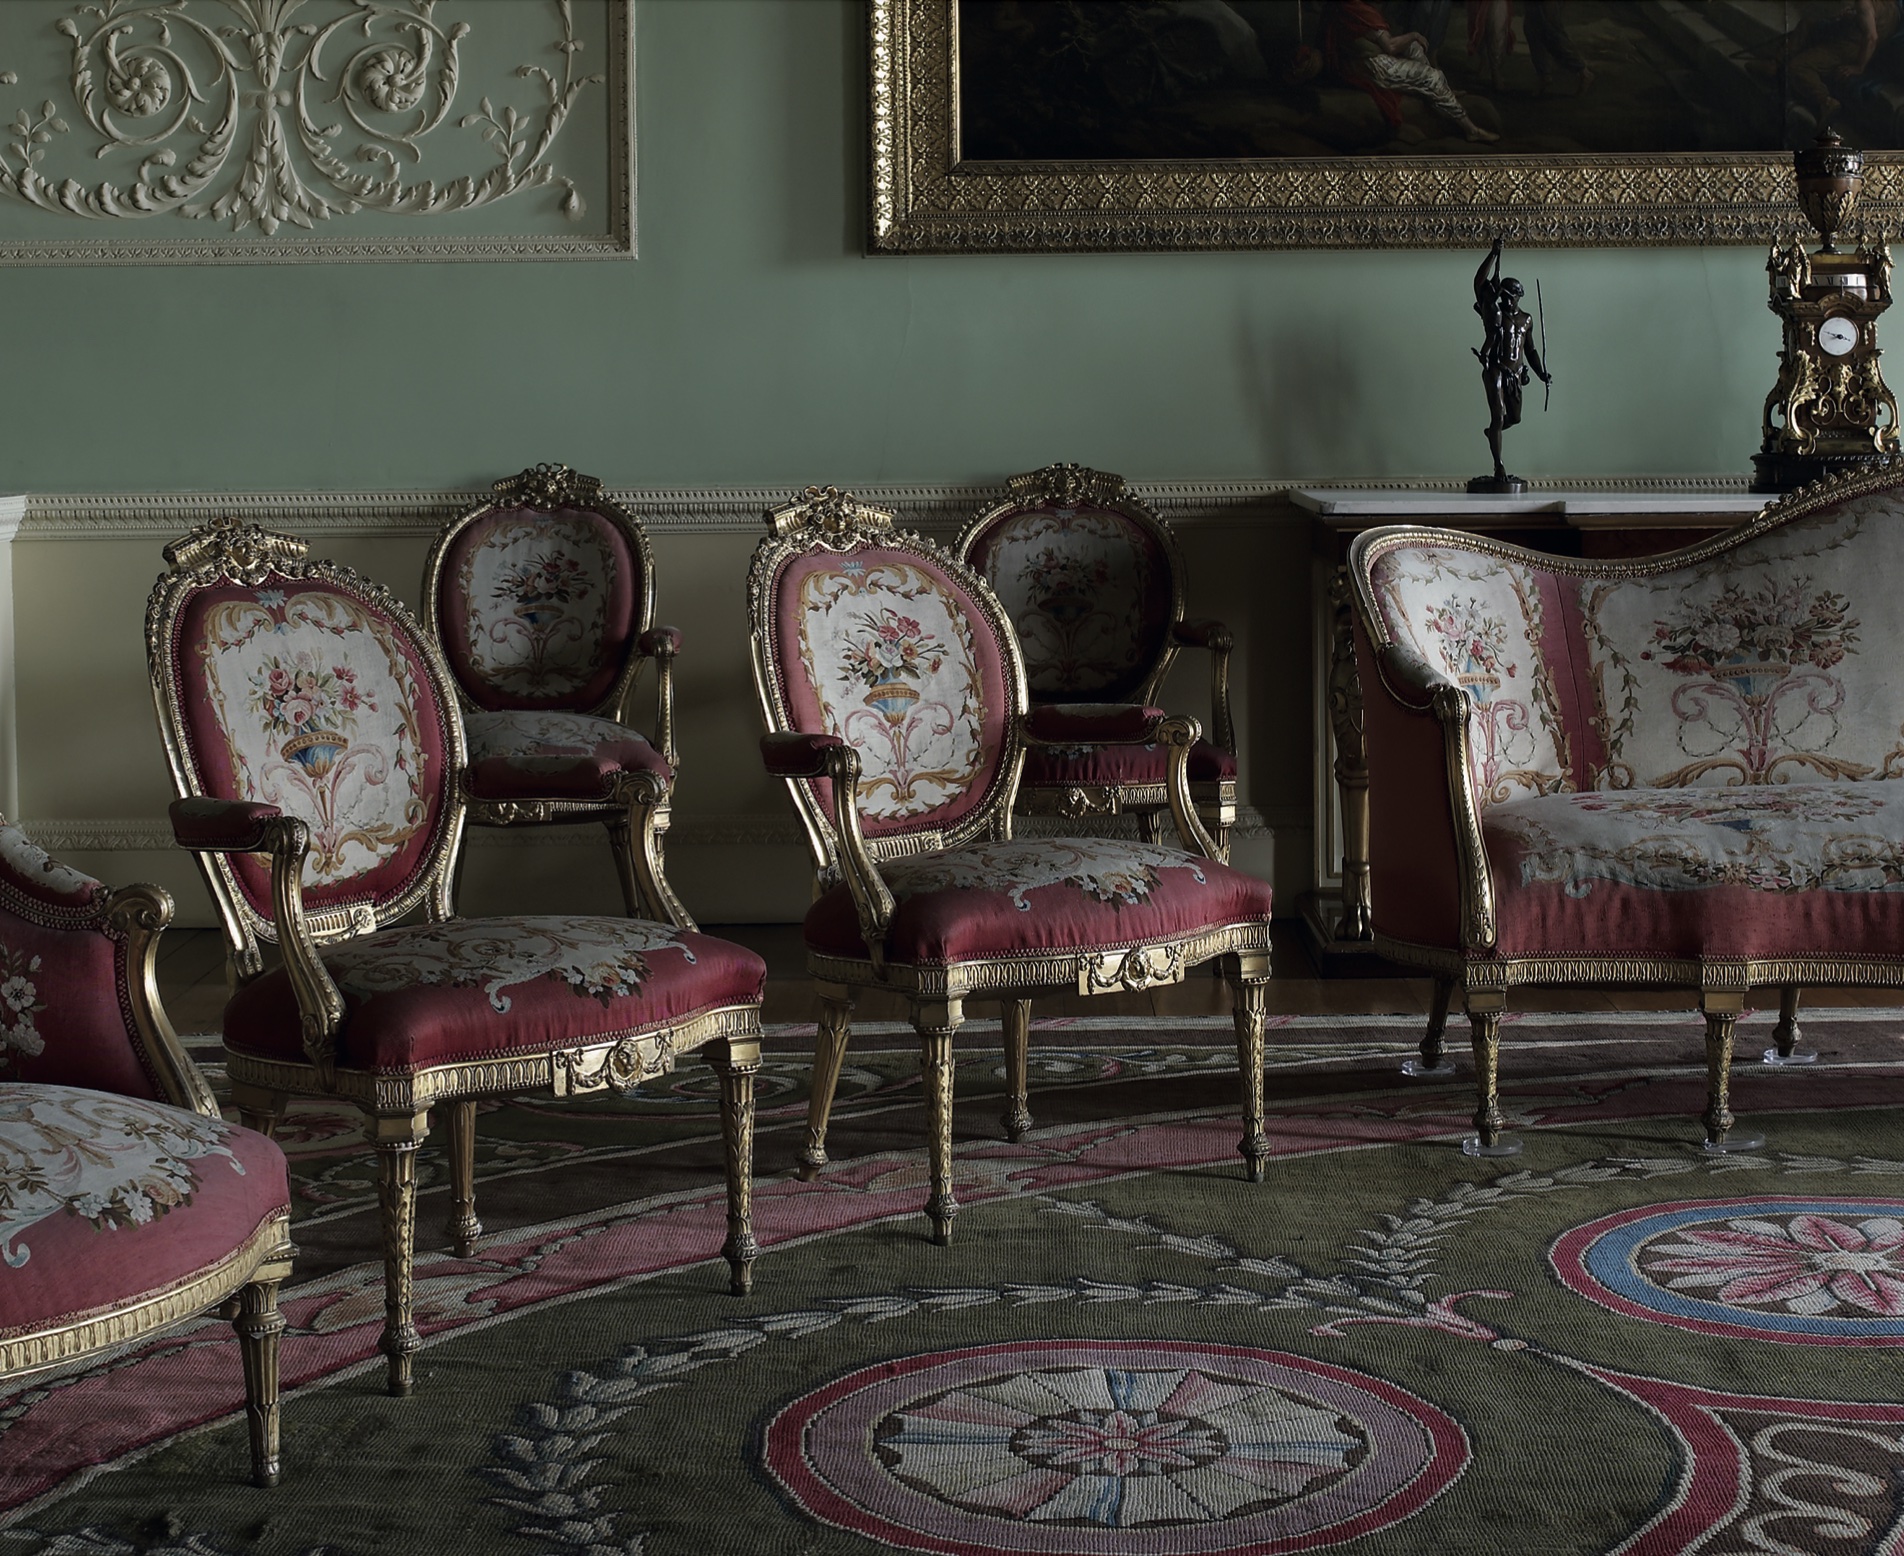 The Music Room at Harewood House harmonises green and pink